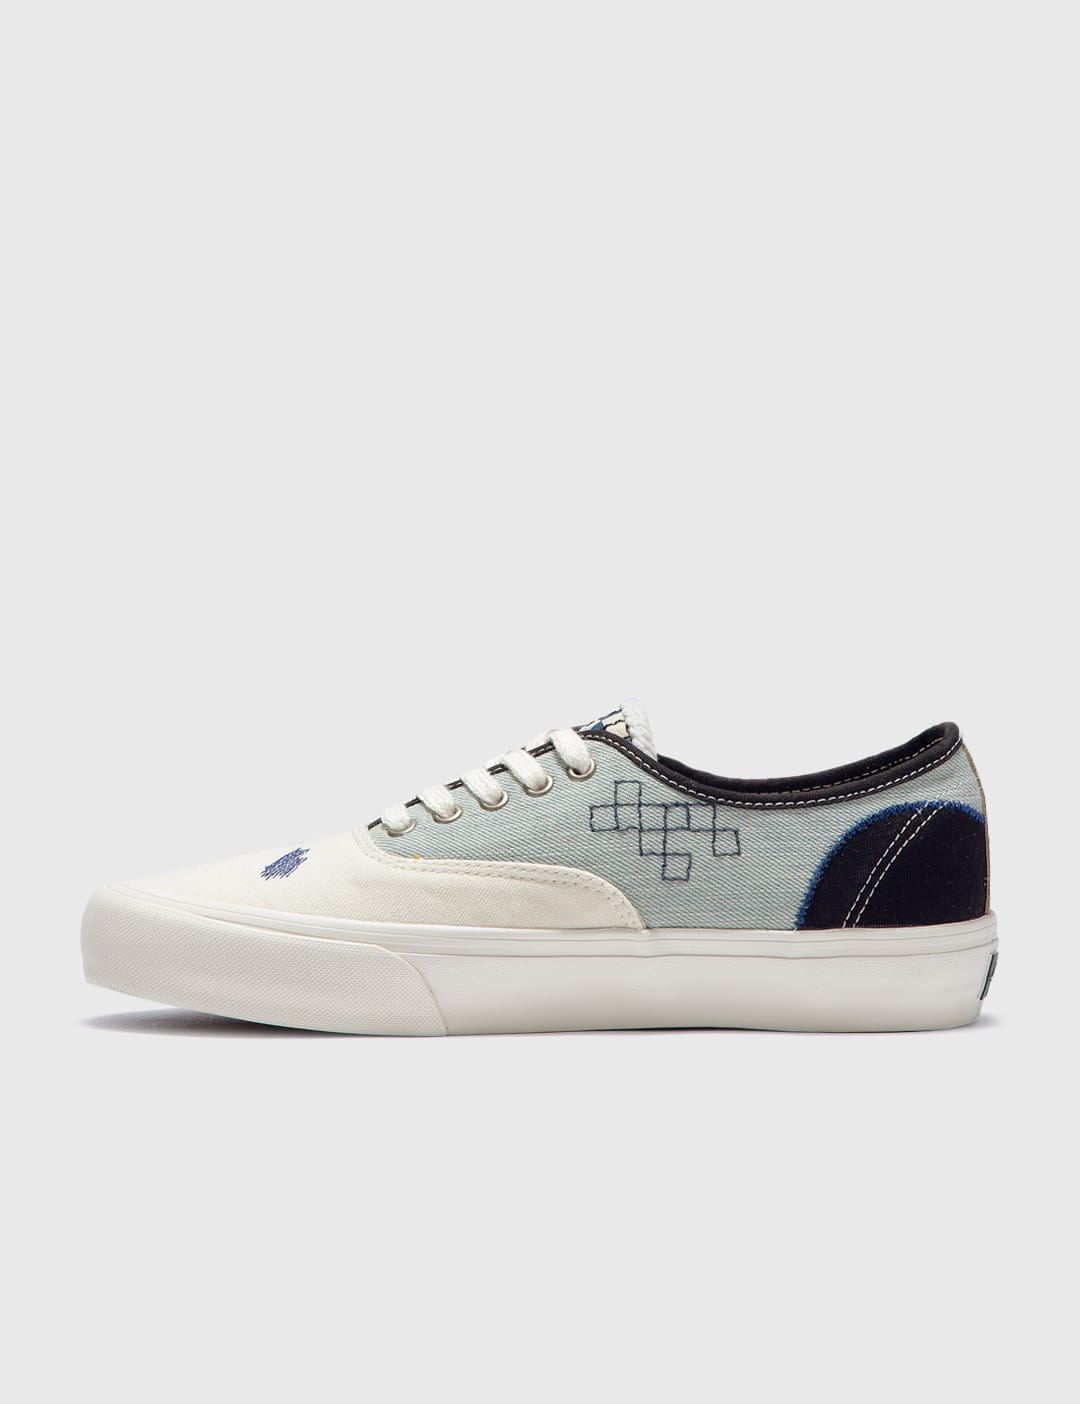 Vans - Vault by Vans Authentic VR3 PW LX | HBX - Globally Curated ...